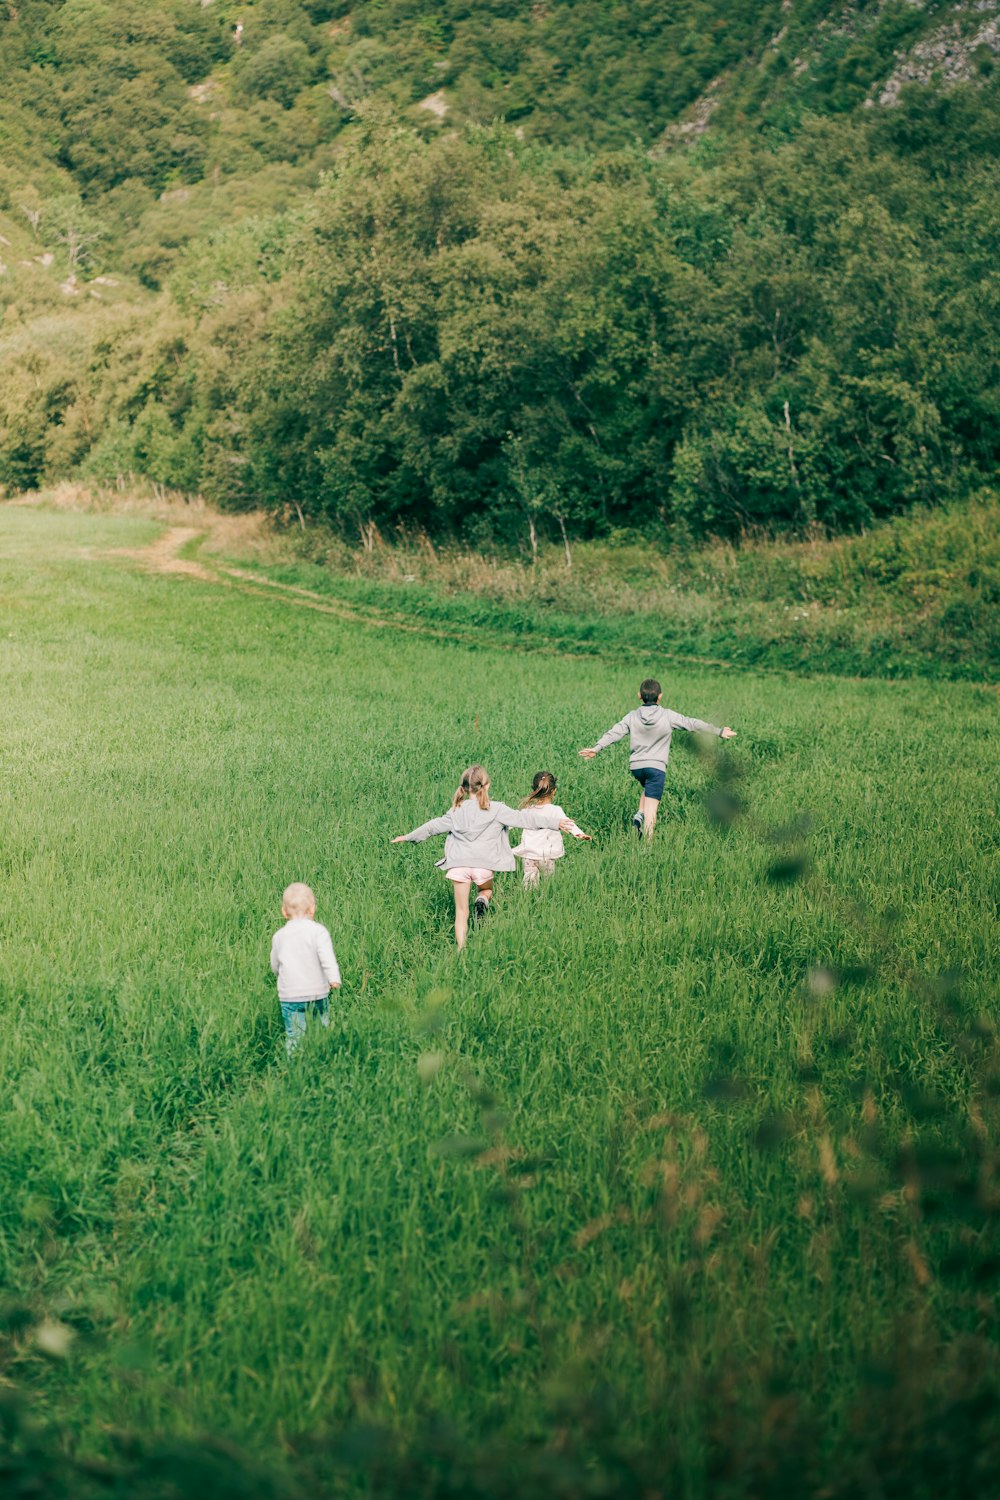 a group of people walking through a lush green field